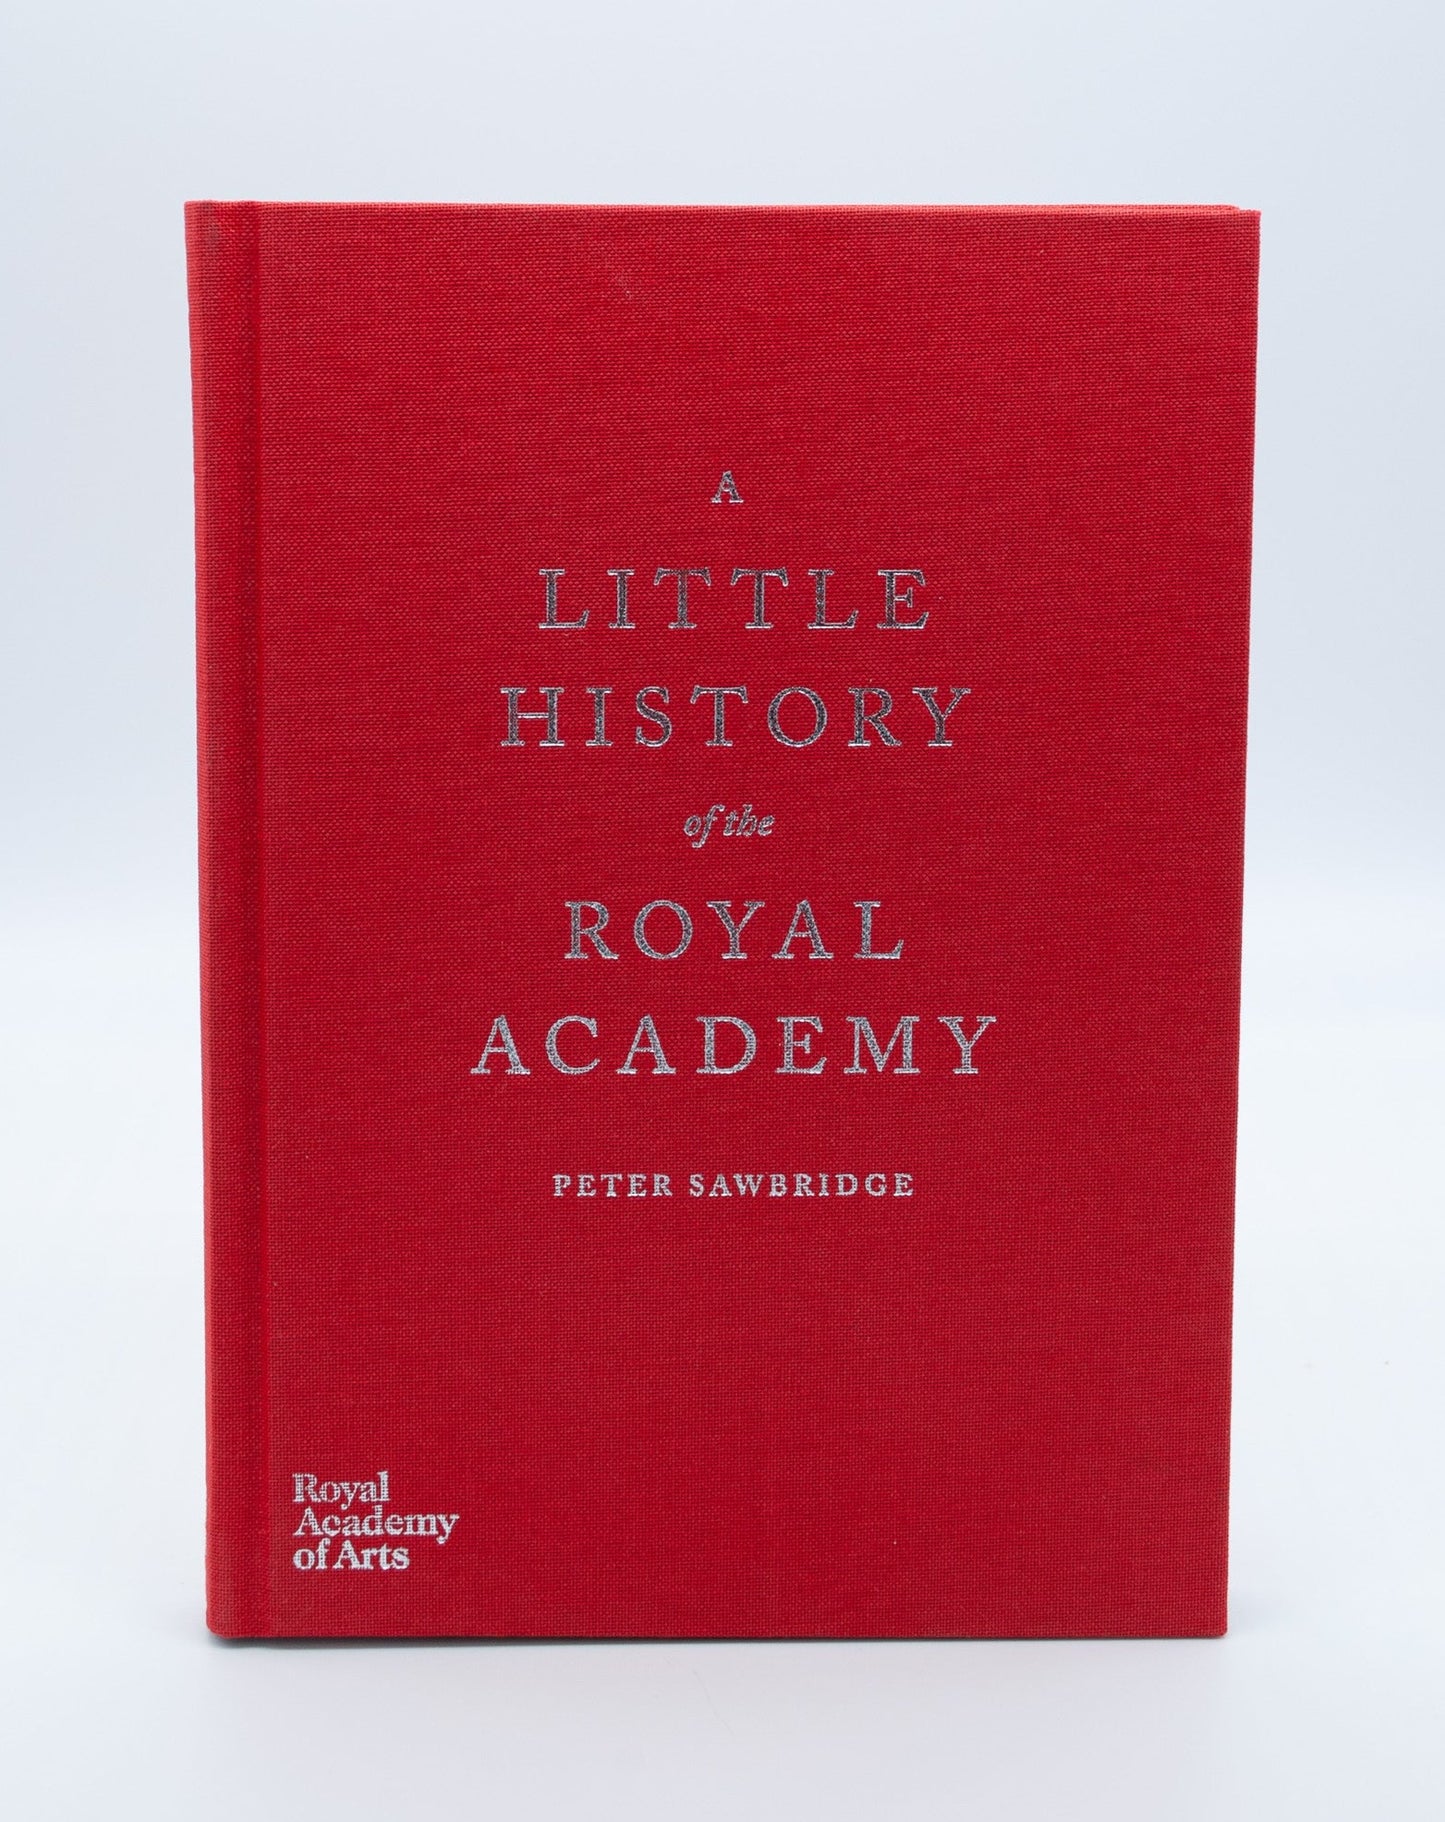 A Little History of the Royal Academy